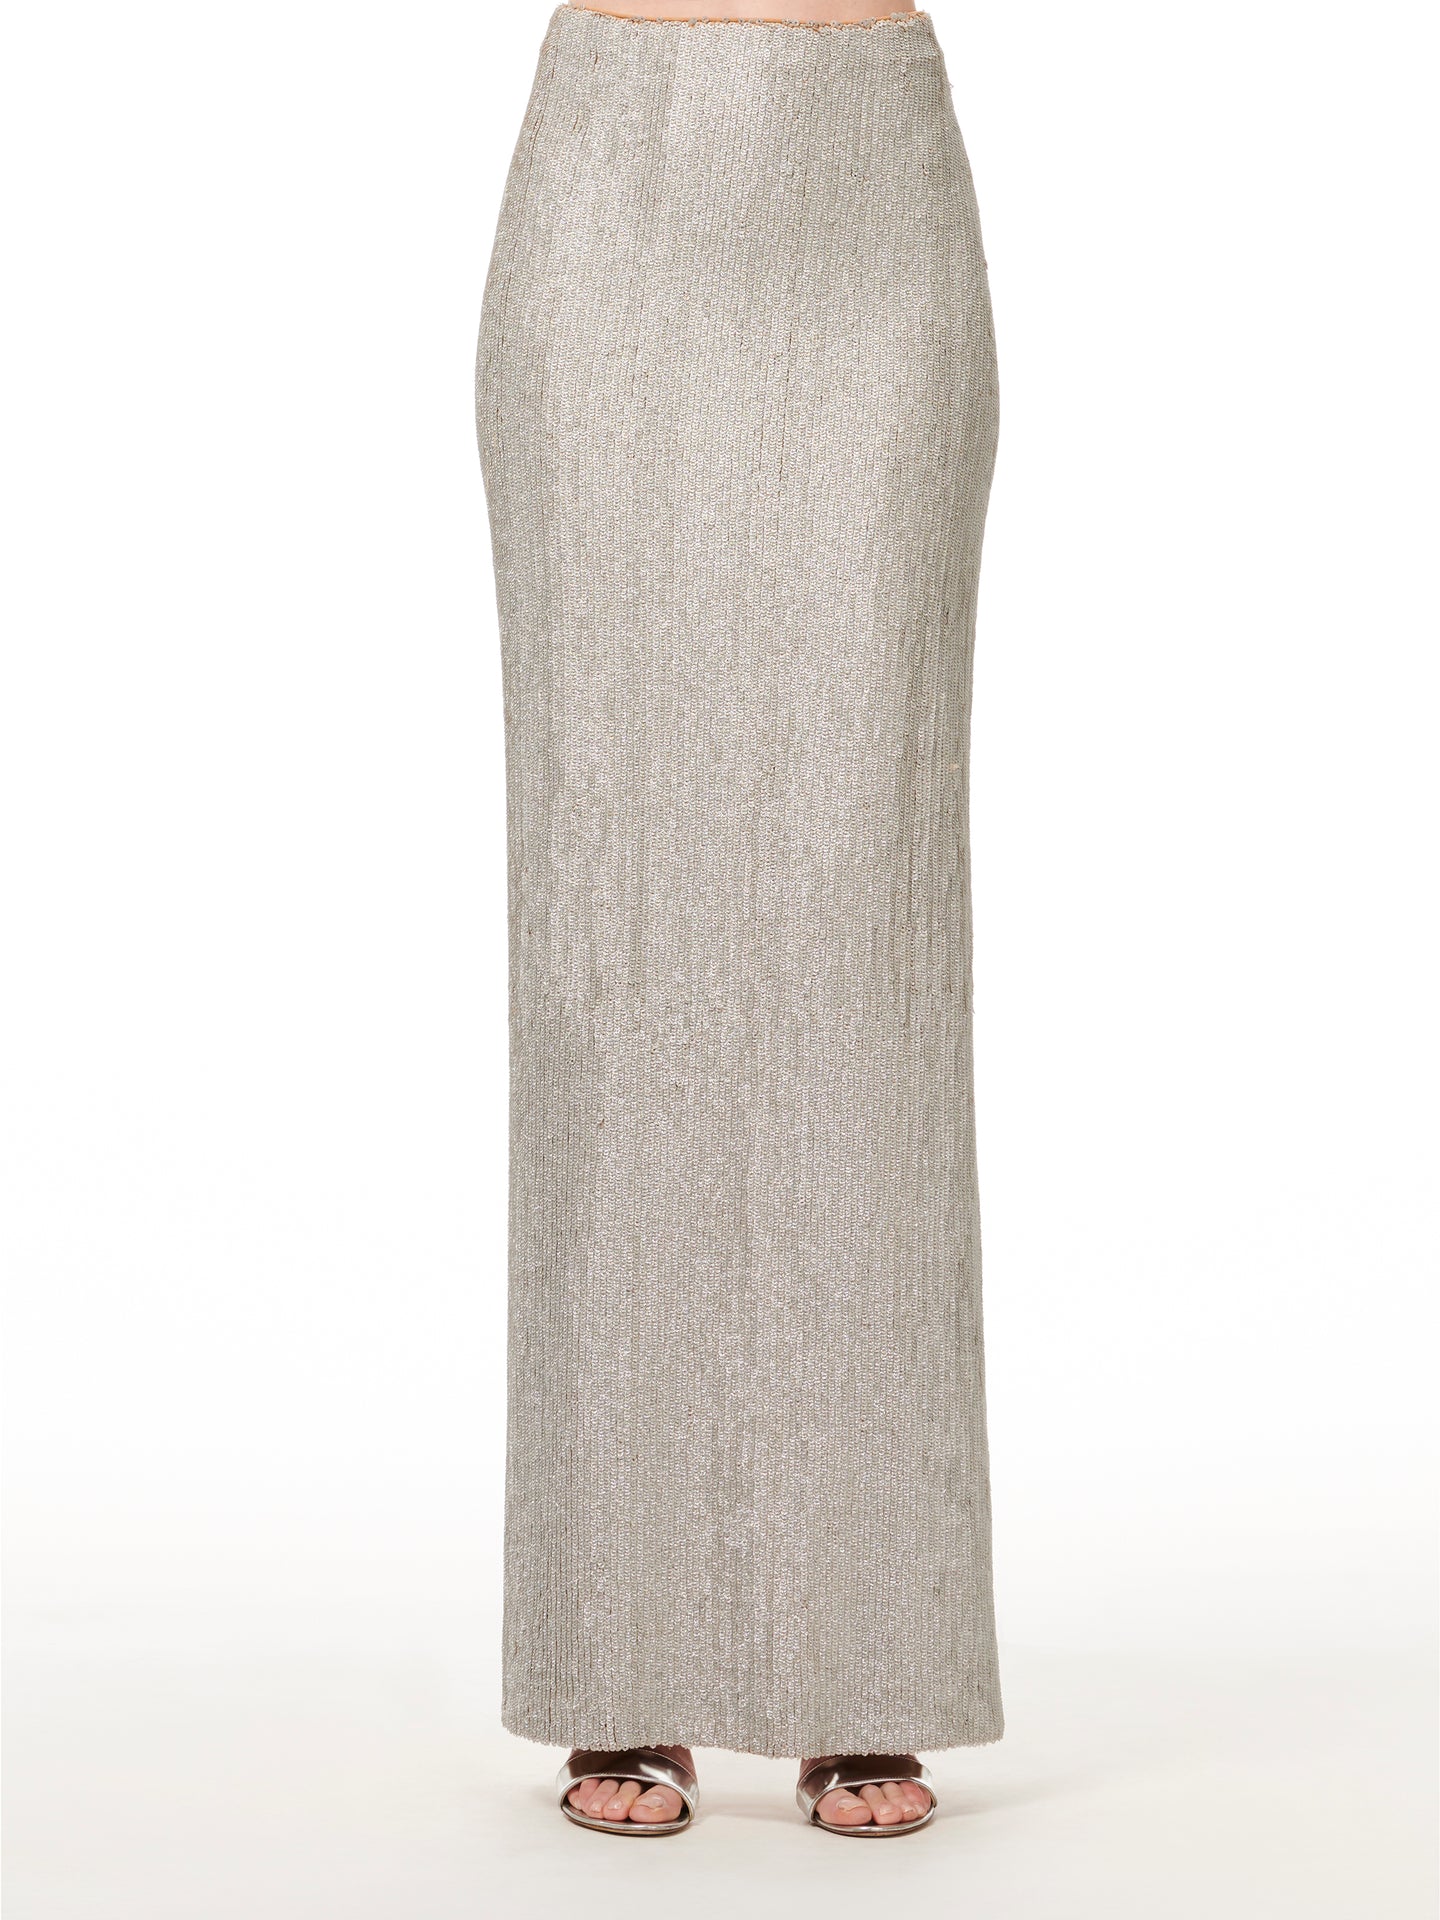 CRYSTALIZED STRETCH SEQUIN SILVER LONG PENCIL SKIRT